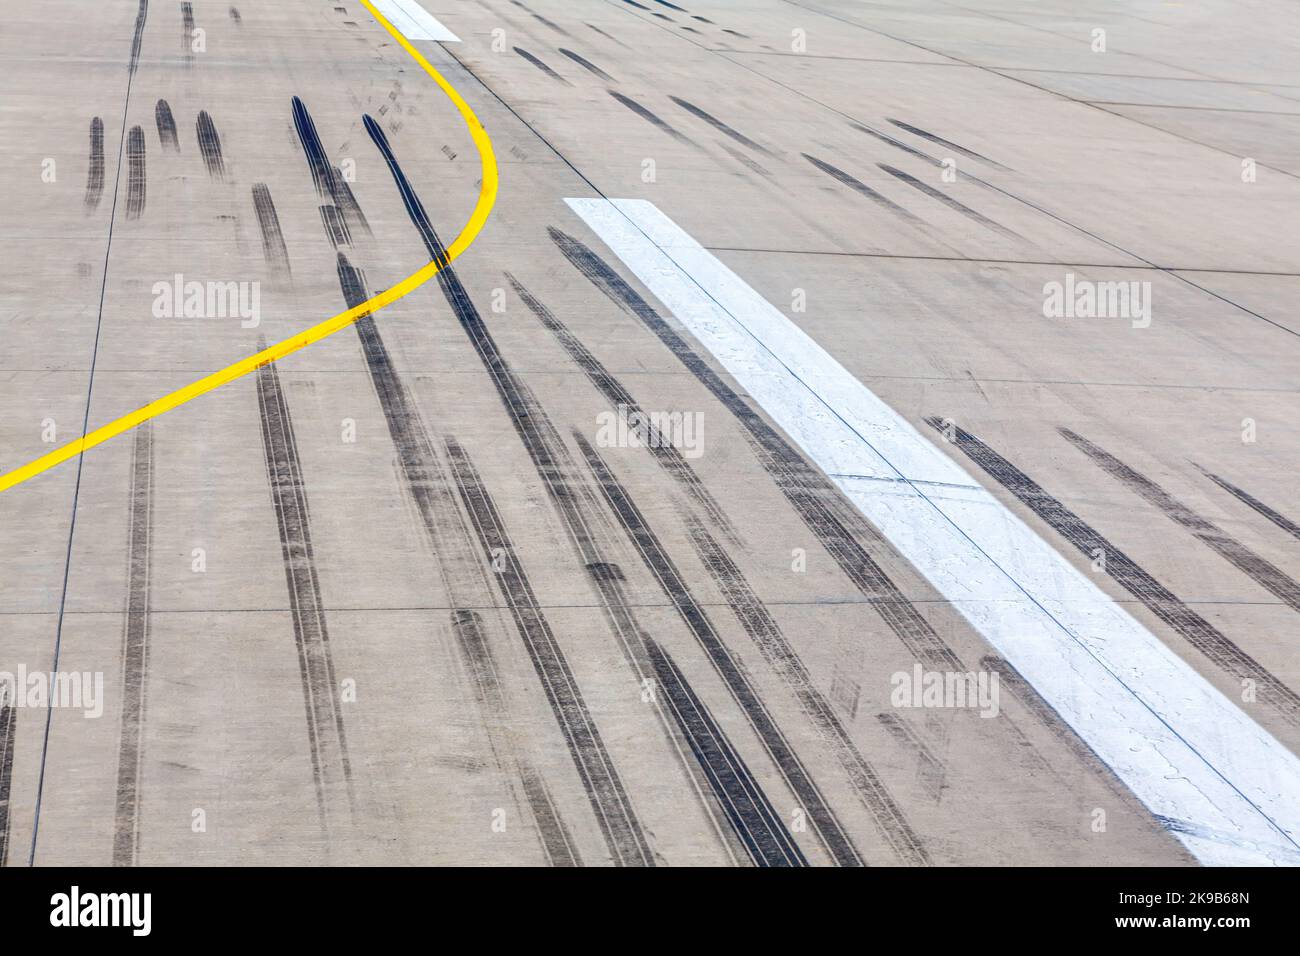 Traces of the aircraft at runway . Ground along which aircraft take off and land Stock Photo